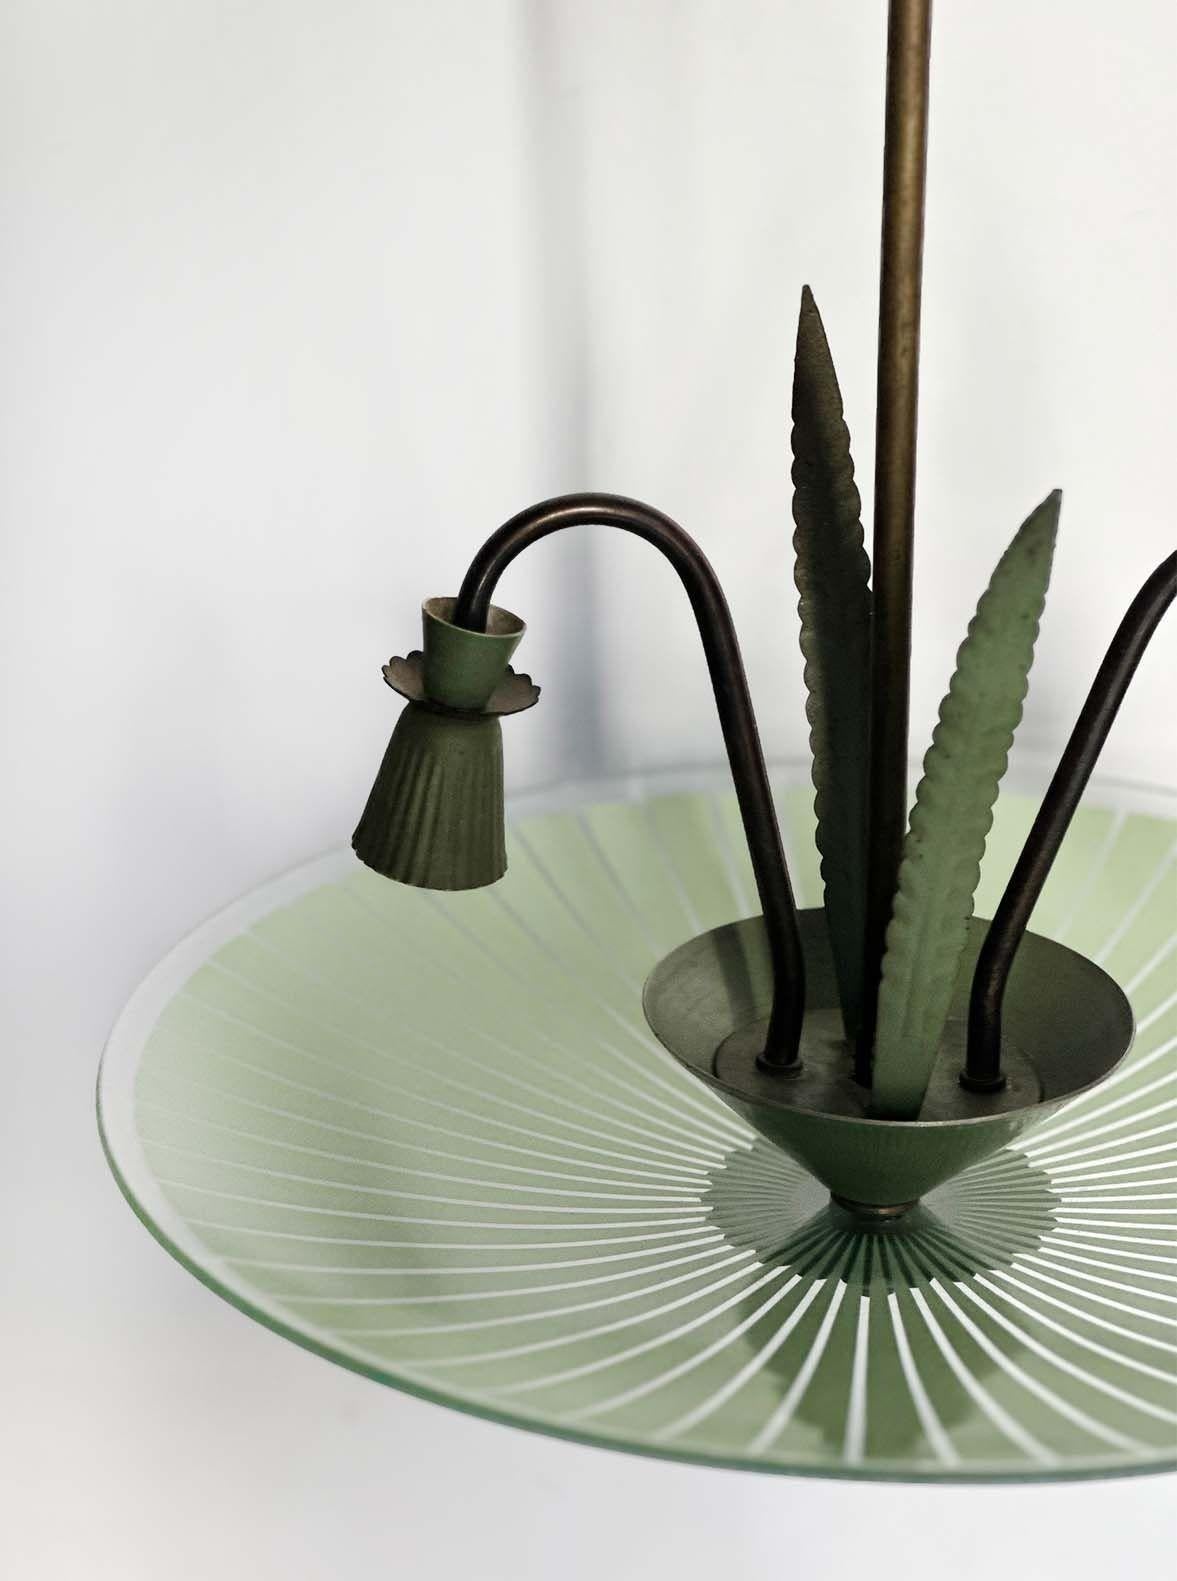 Vintage Murano glass and metal pendant made in Italy, c. 1960's by Stilnovo. This fixture stands out due to its beautiful green tones and striped design all around, as well as a cattail design in the center of the piece. Includes two candelabra